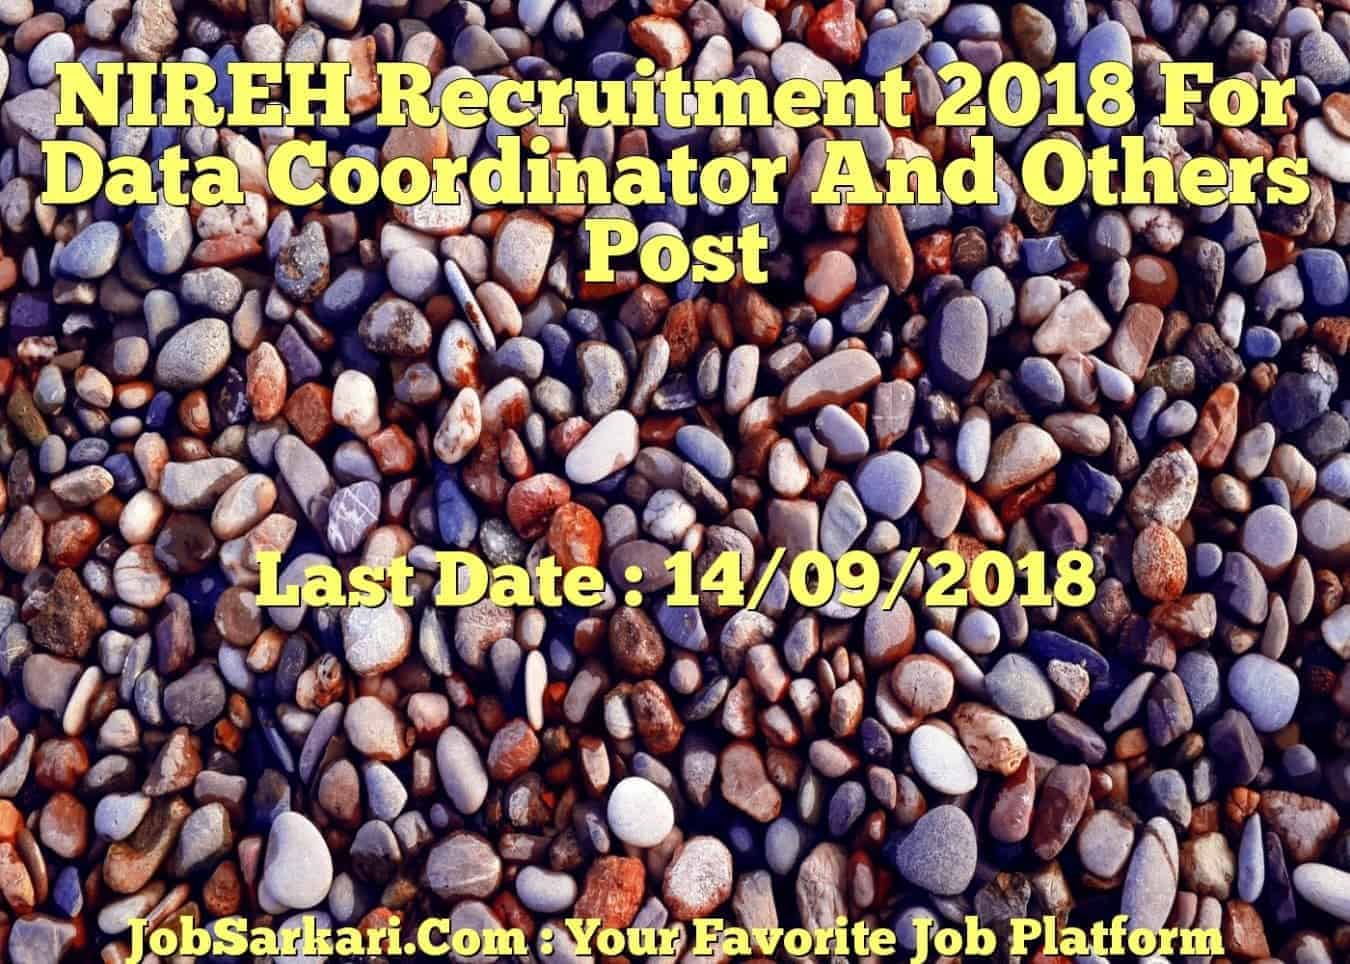 NIREH Recruitment 2018 For Data Coordinator And Others Post